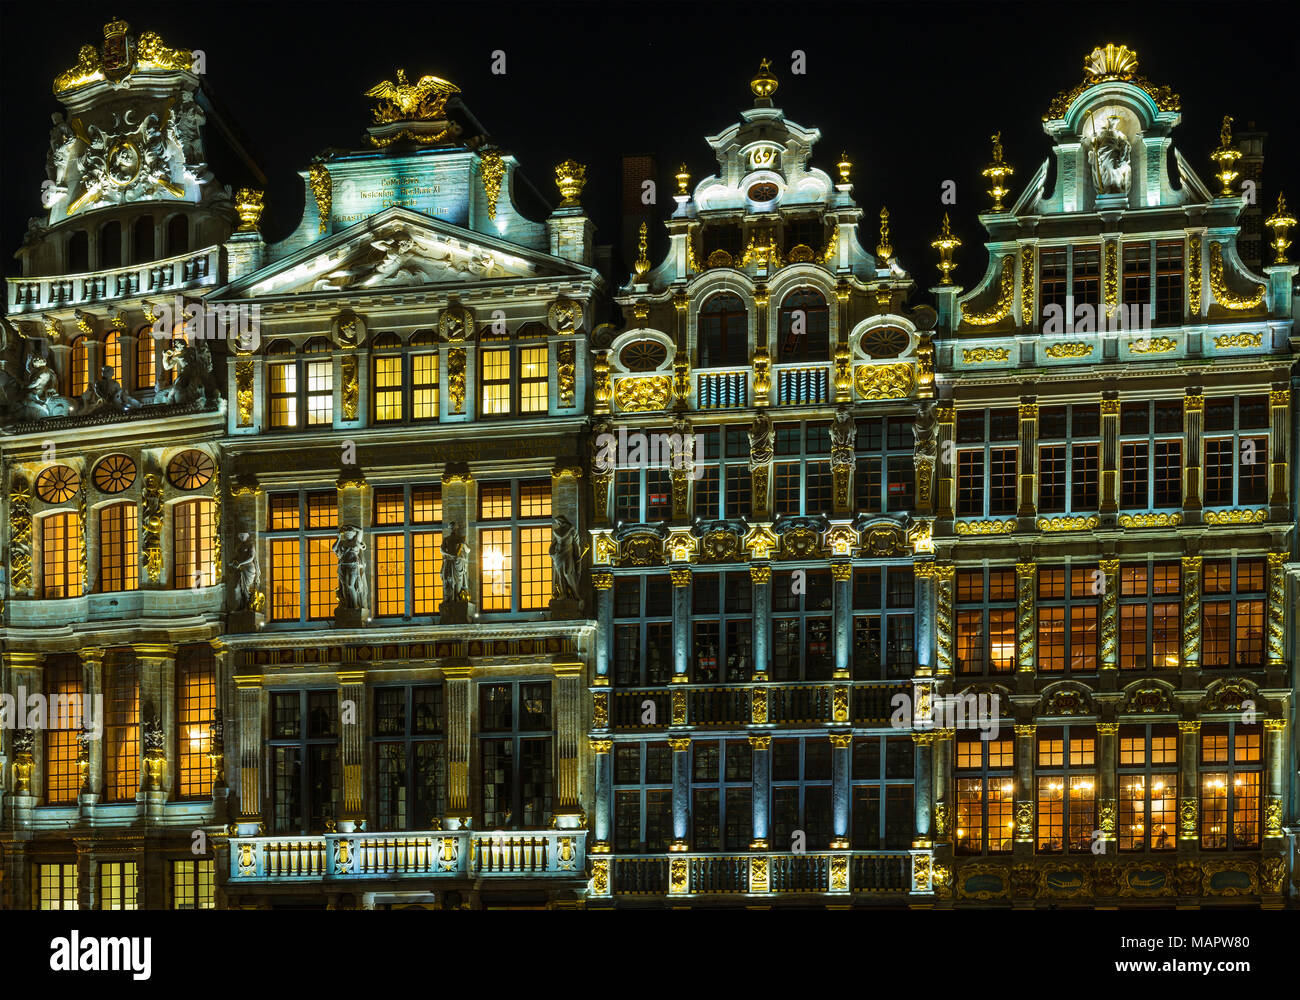 Facades of guild houses of the Grand Place or main square of Brussels illuminated at night in Italian Baroque style with Flemish influences, Belgium. Stock Photo